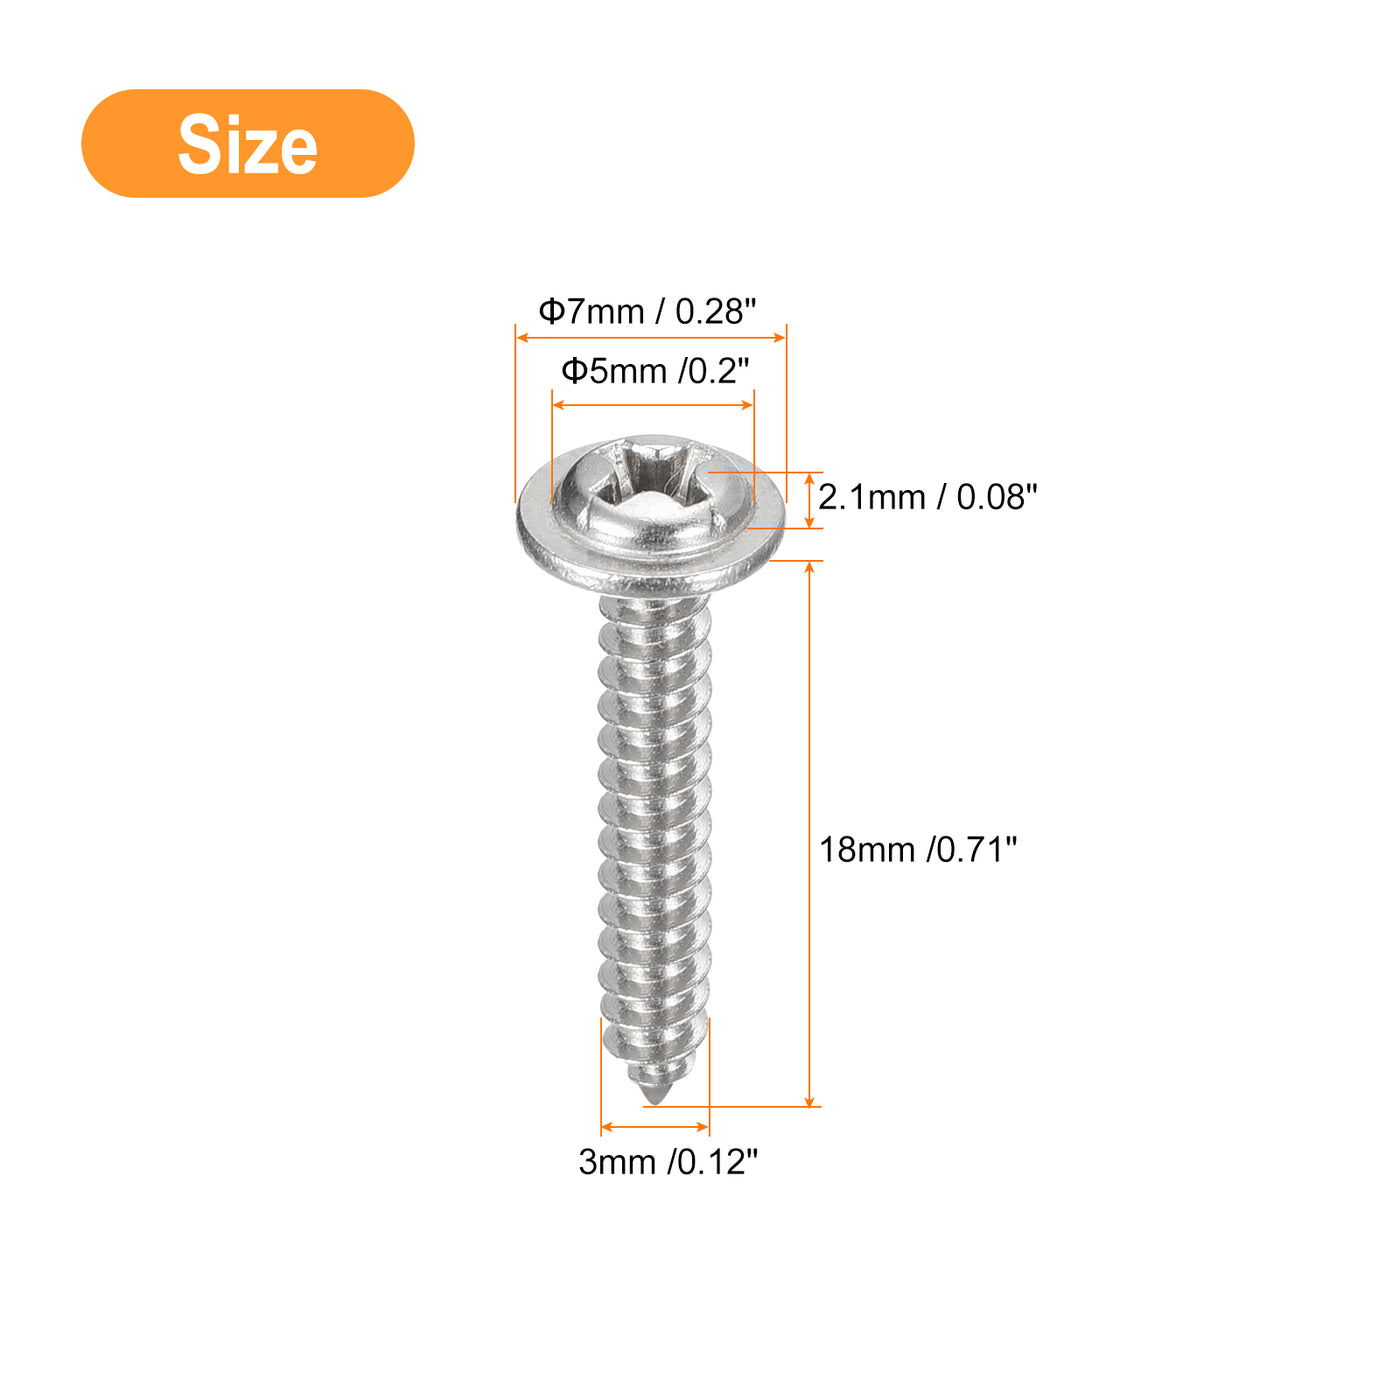 uxcell Uxcell ST3x18mm Phillips Pan Head Self-tapping Screw with Washer, 100pcs - 304 Stainless Steel Wood Screw Full Thread (Silver)